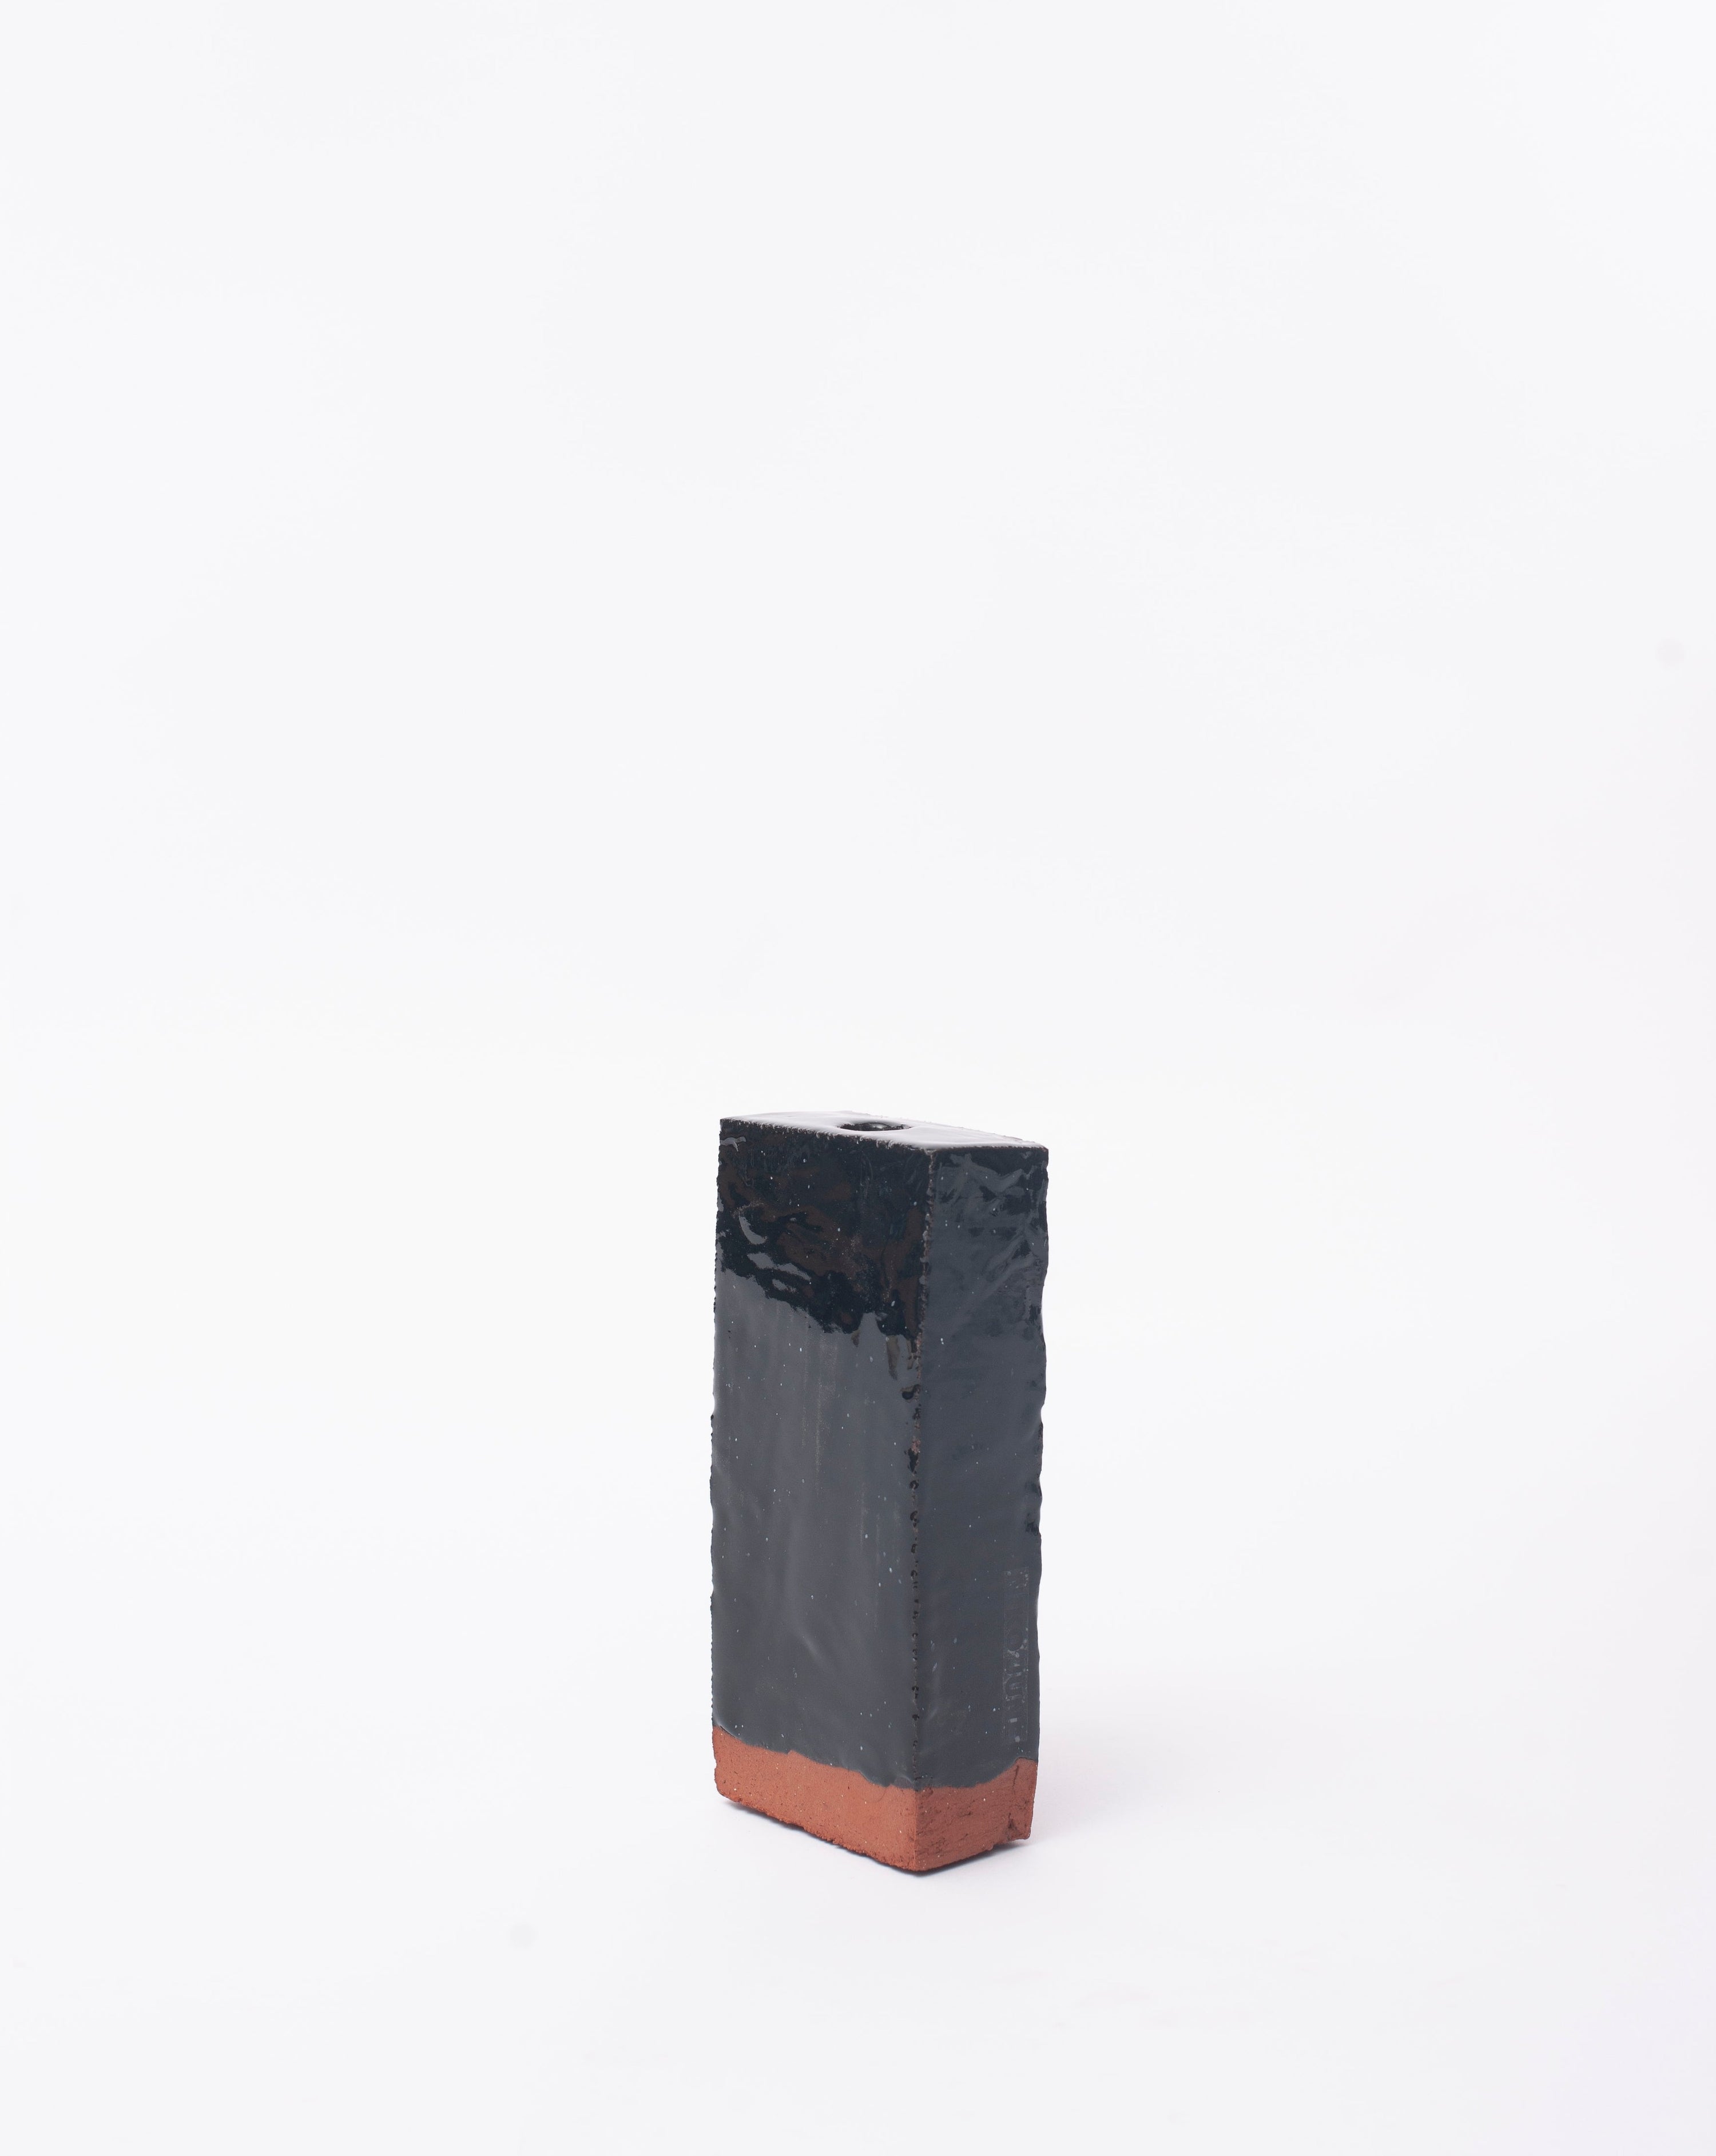 Handmade black brick ceramic candle holder in white glaze in background with right side view